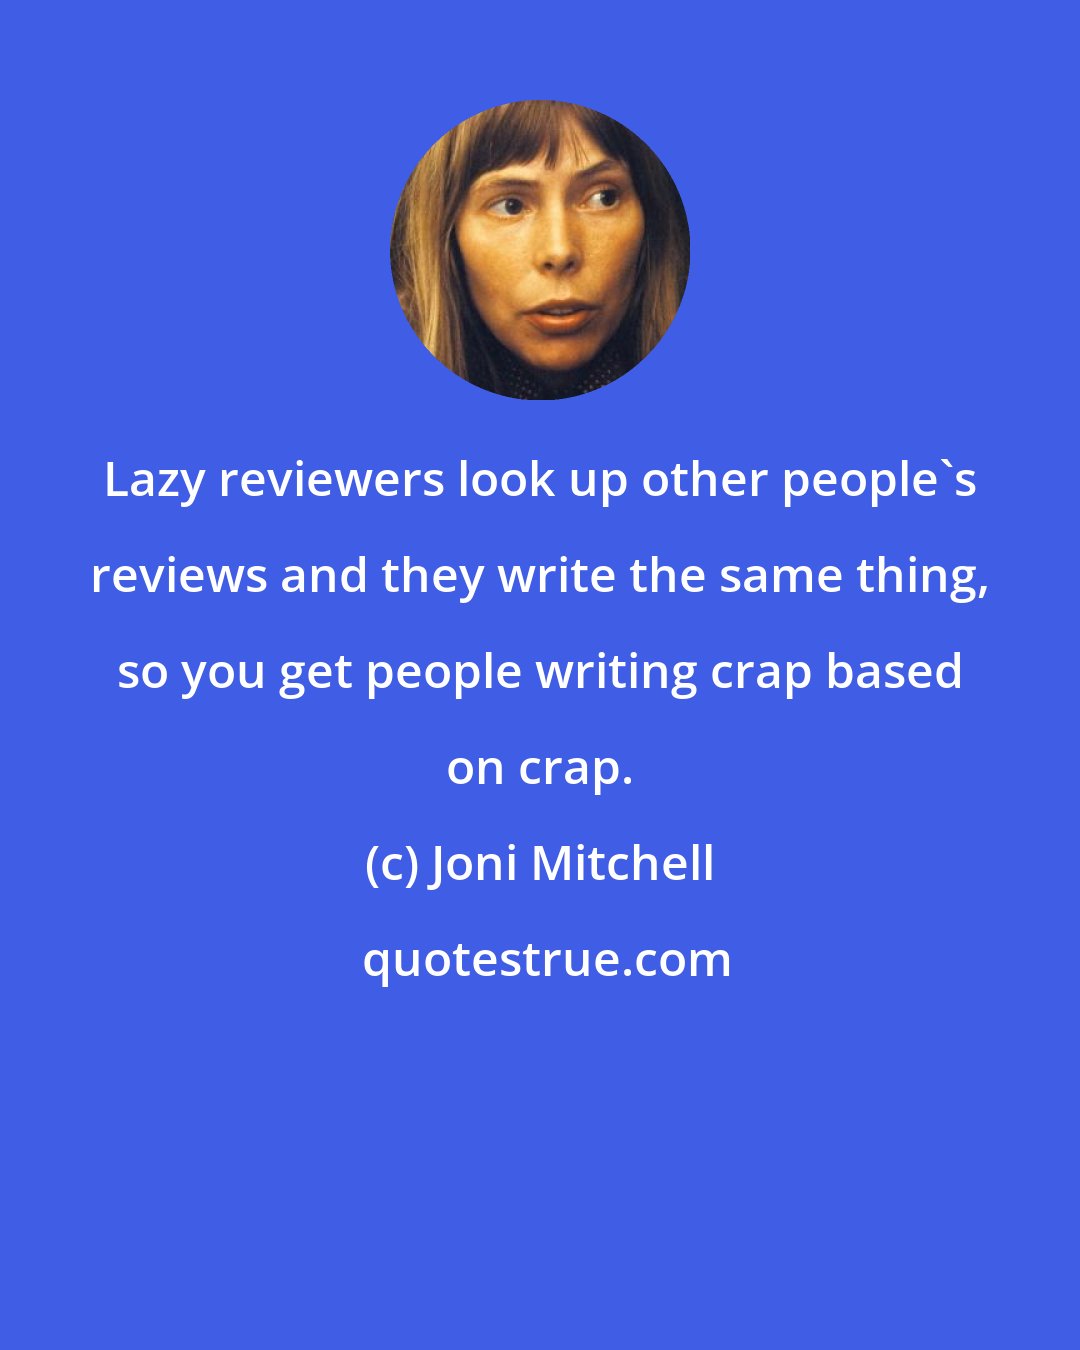 Joni Mitchell: Lazy reviewers look up other people's reviews and they write the same thing, so you get people writing crap based on crap.